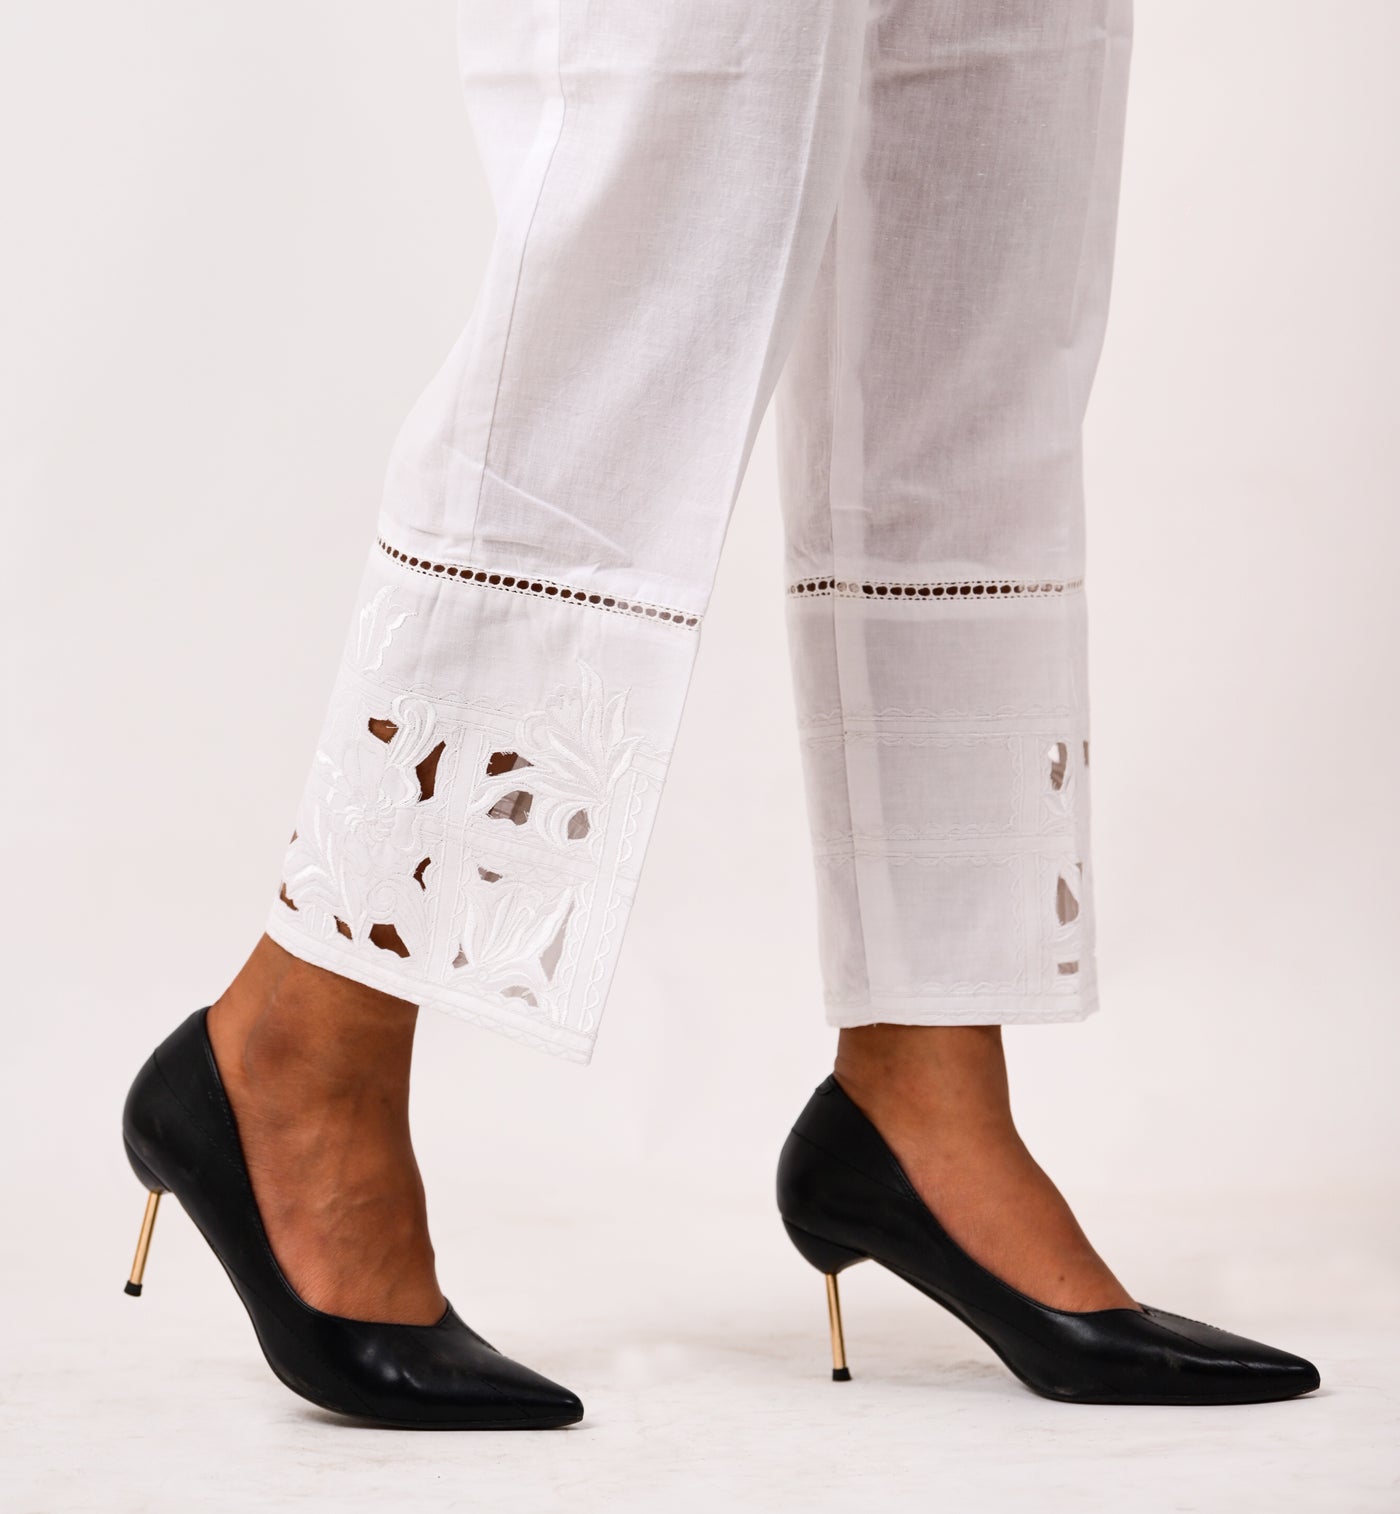 White on white Checkered Embroidered pants-shopsneh